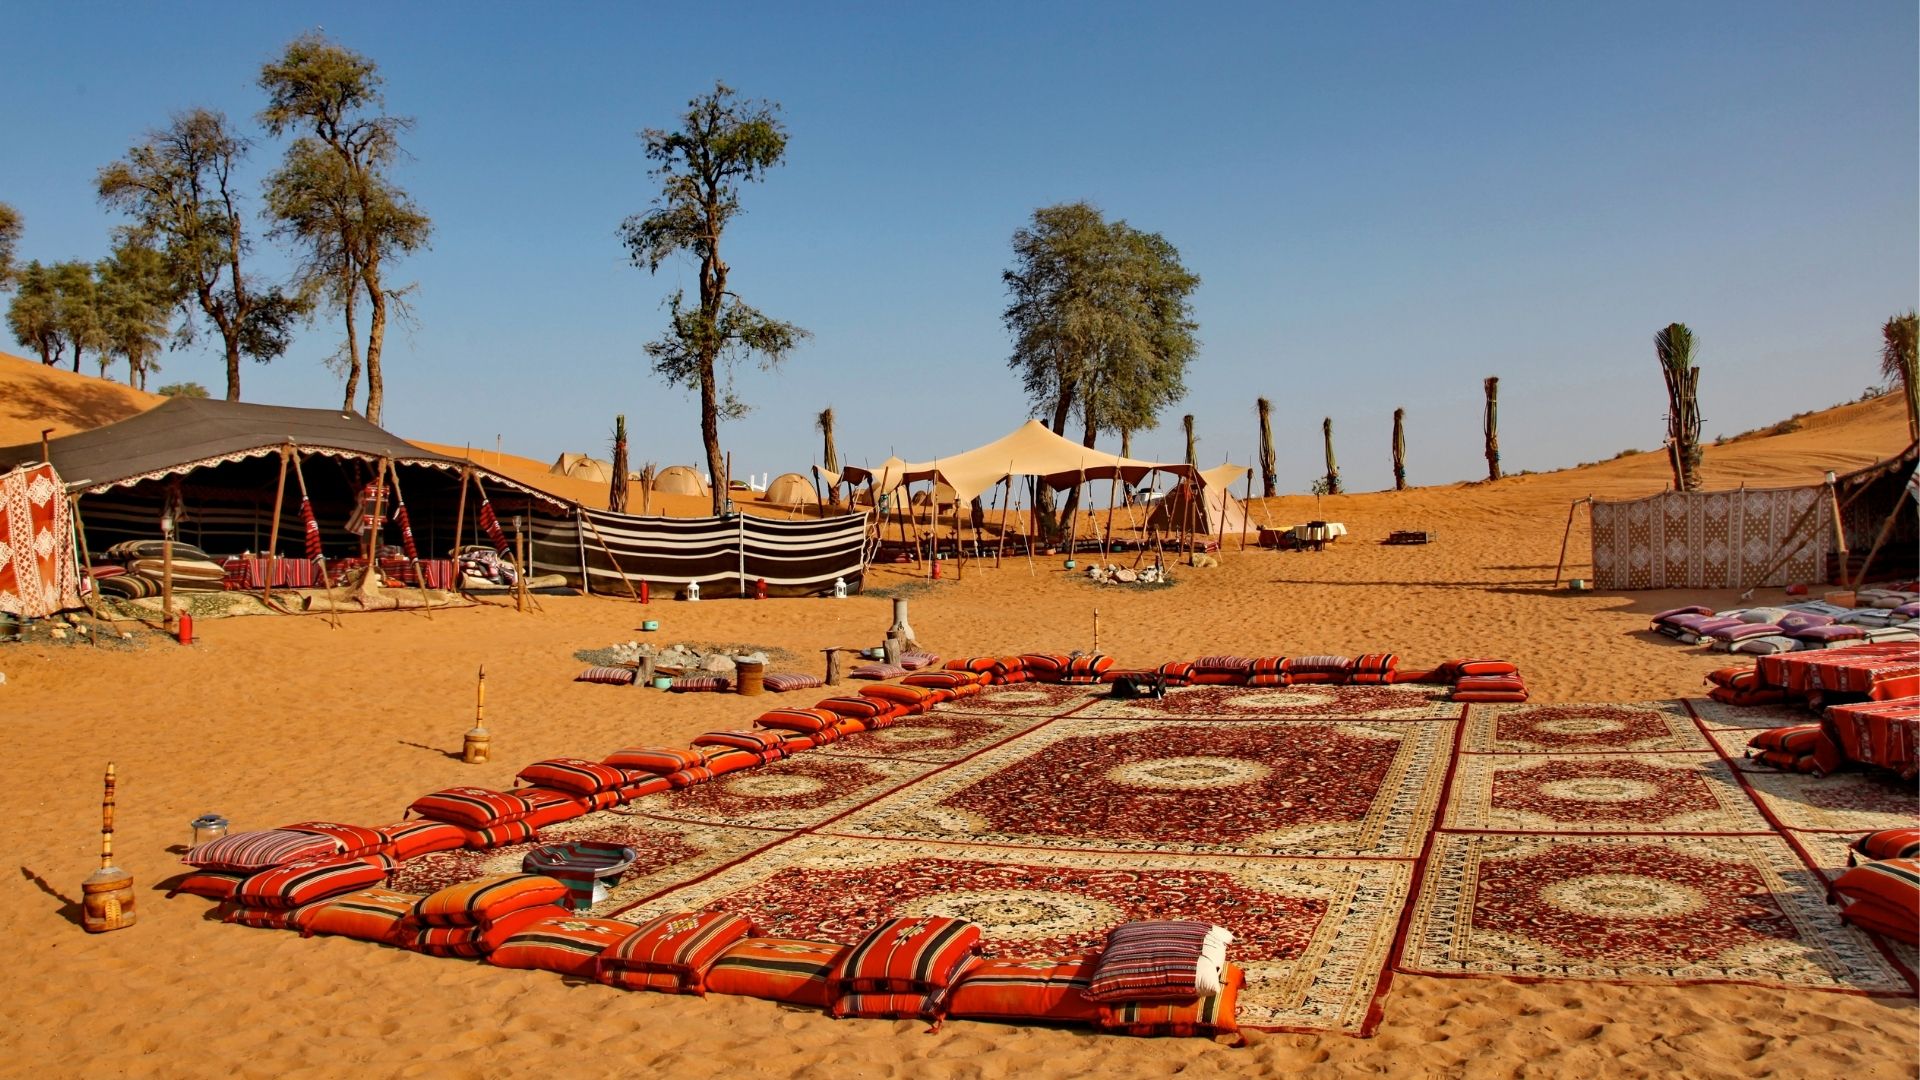 Marvel at the picturesque Bassata Village in the midst of a serene desert landscape, with the golden sands stretching out to the horizon and the clear blue sky overhead.